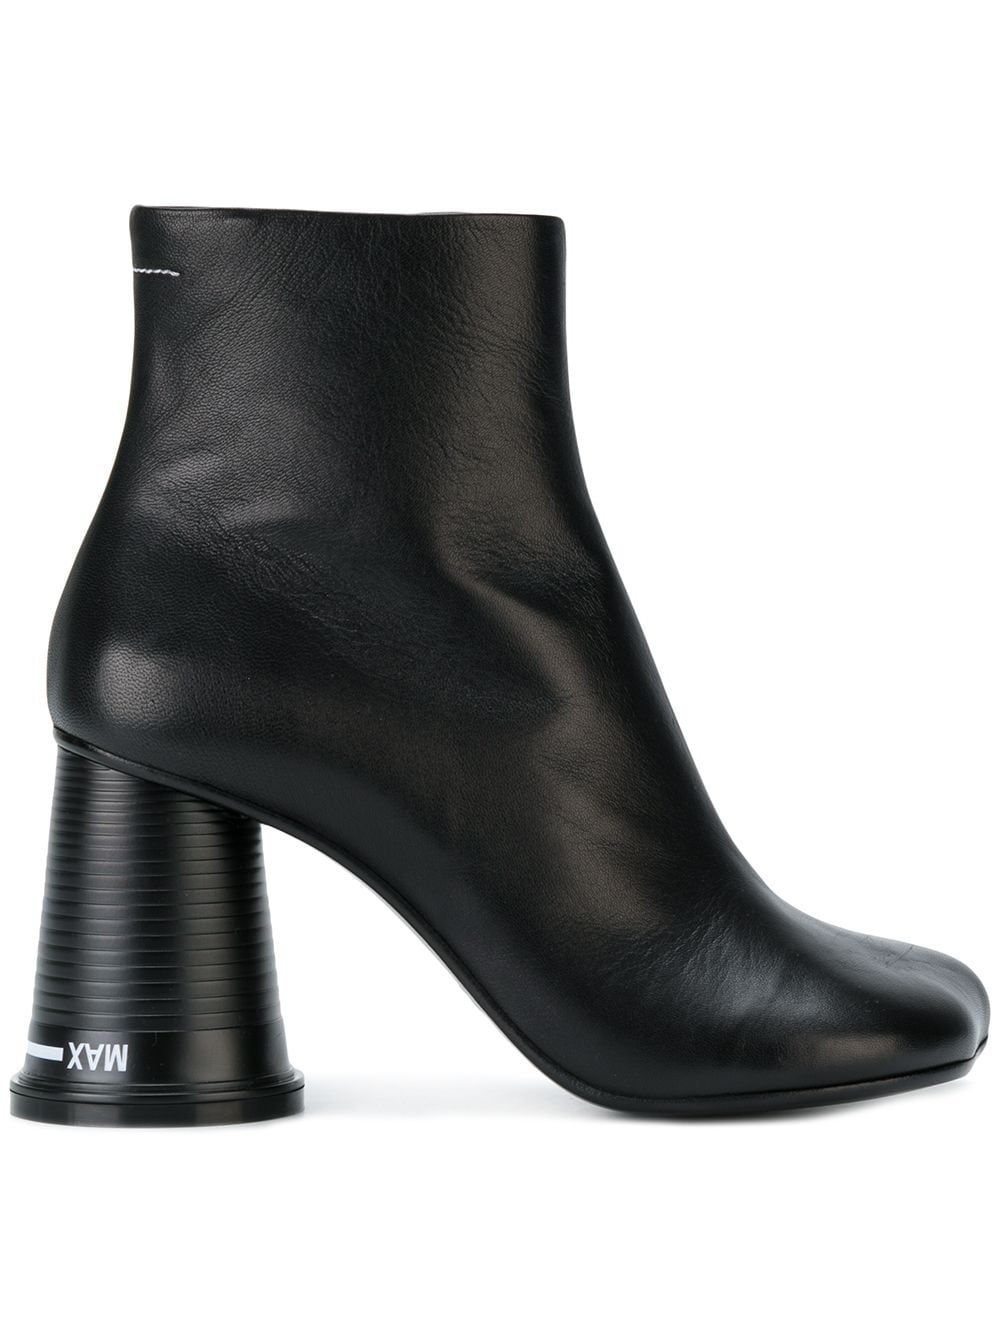 Mm6 Maison Margiela boots with cup shaped heel - Black | FarFetch US